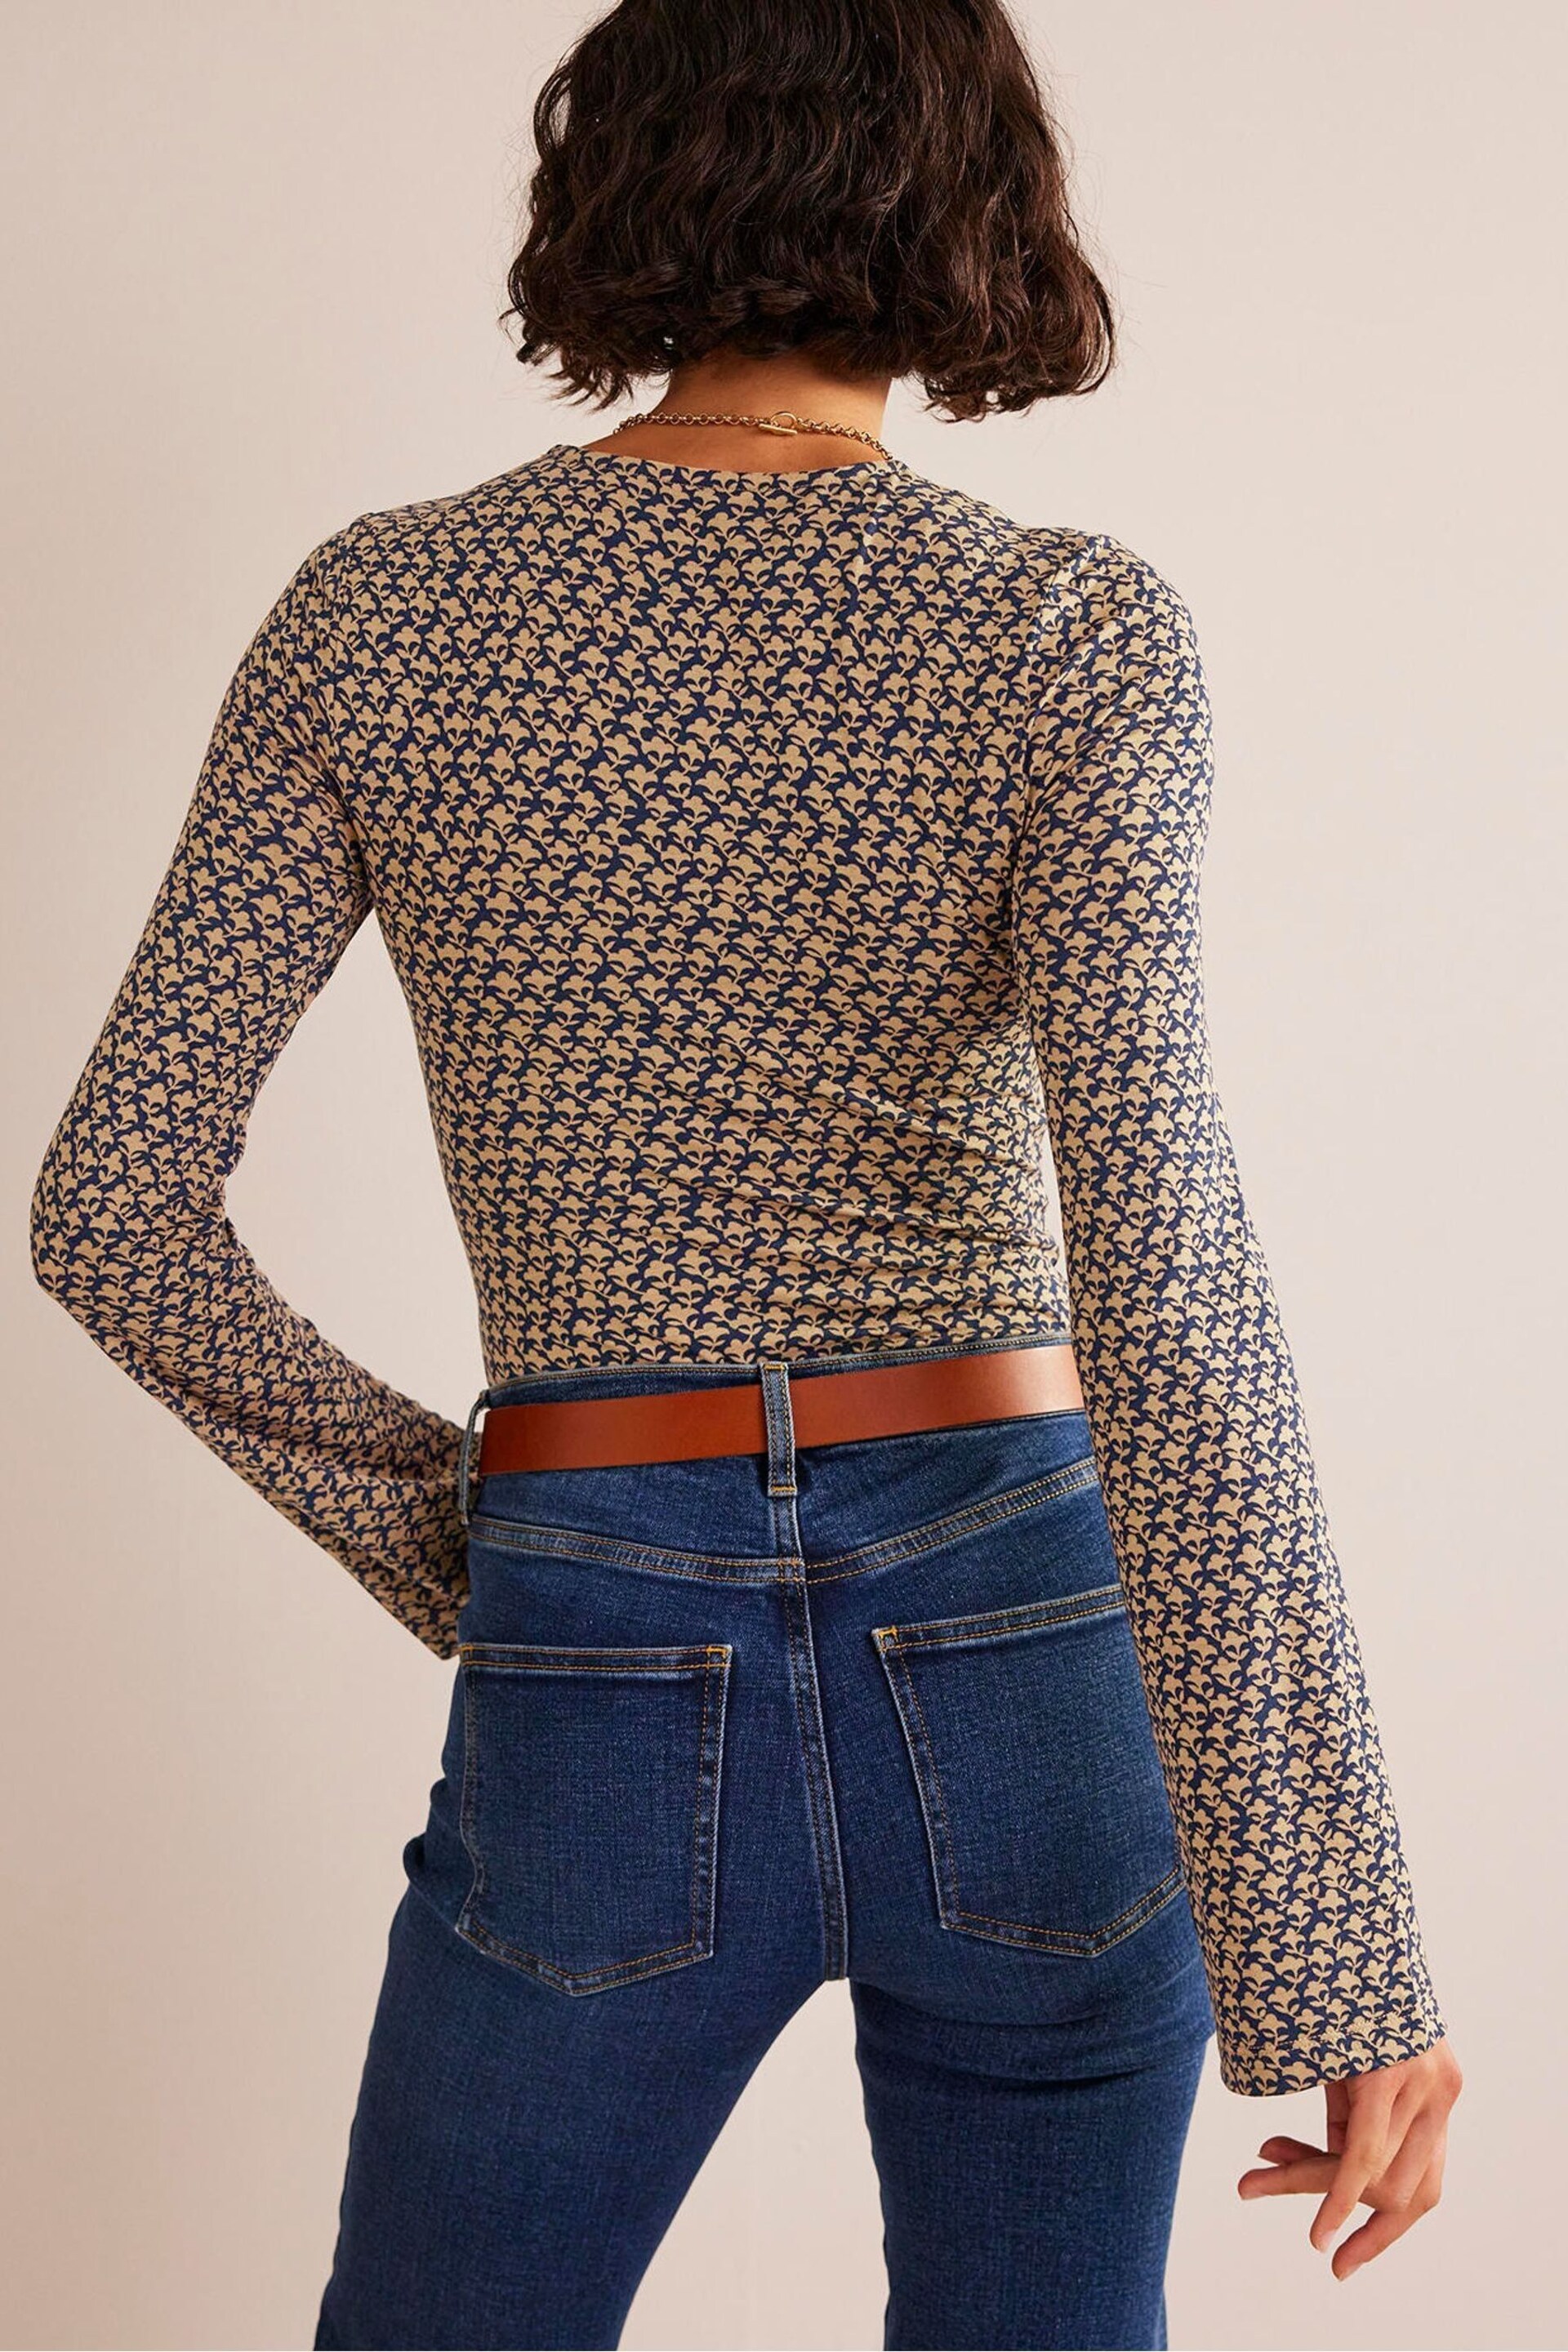 Boden Brown Knot Front Flare Sleeve Top - Image 2 of 4